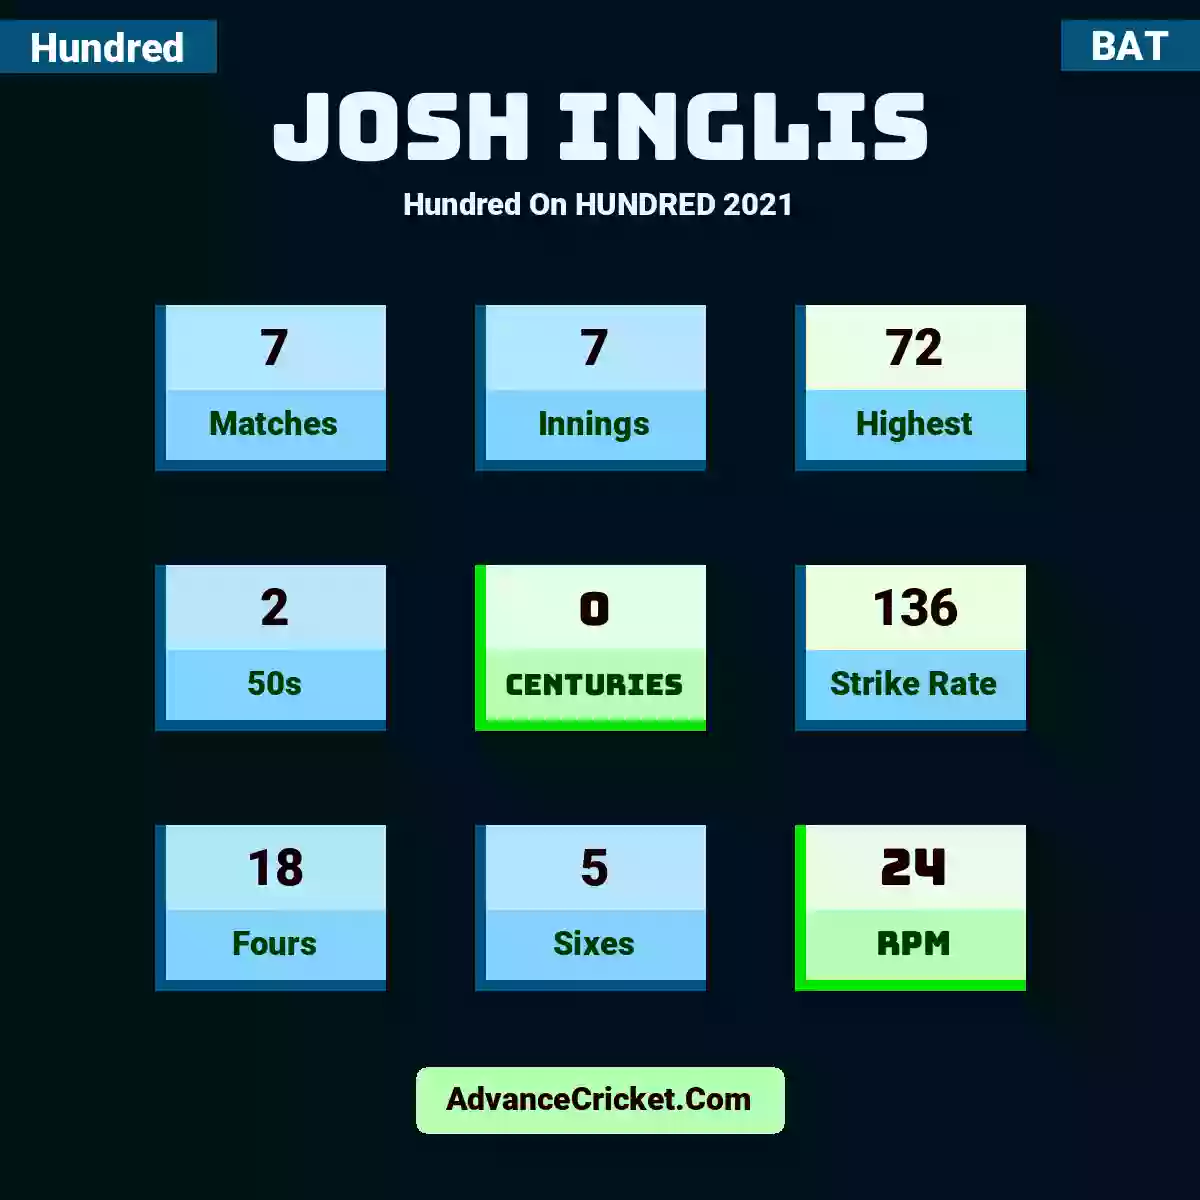 Josh Inglis Hundred  On HUNDRED 2021, Josh Inglis played 7 matches, scored 72 runs as highest, 2 half-centuries, and 0 centuries, with a strike rate of 136. J.Inglis hit 18 fours and 5 sixes, with an RPM of 24.